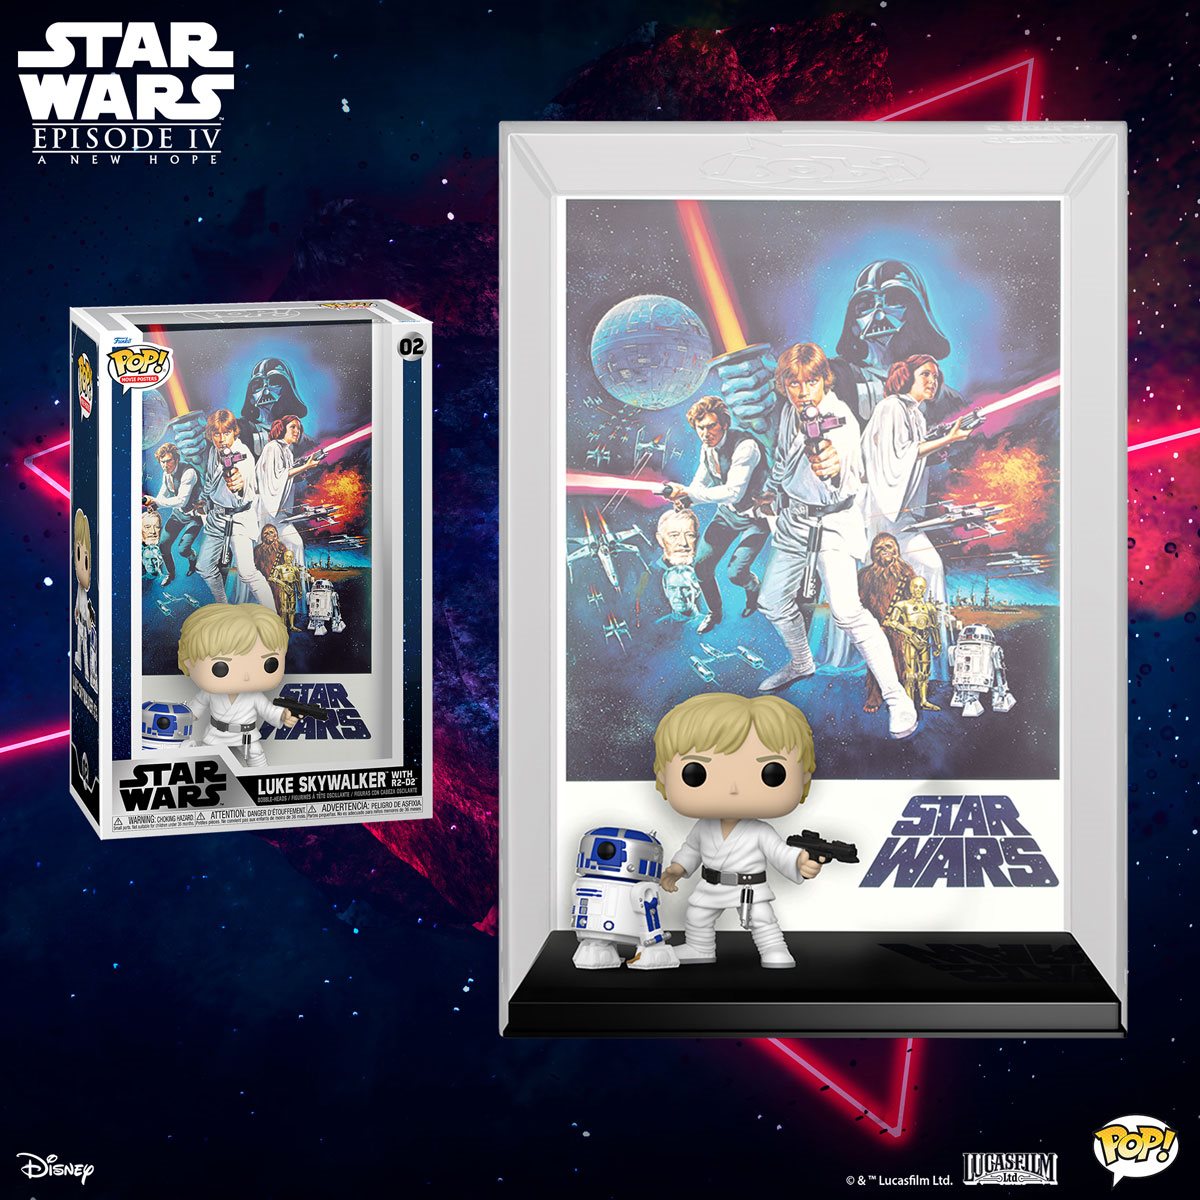 Star Wars: Episode IV - A New Hope Funko Pop! Movie Poster Figure